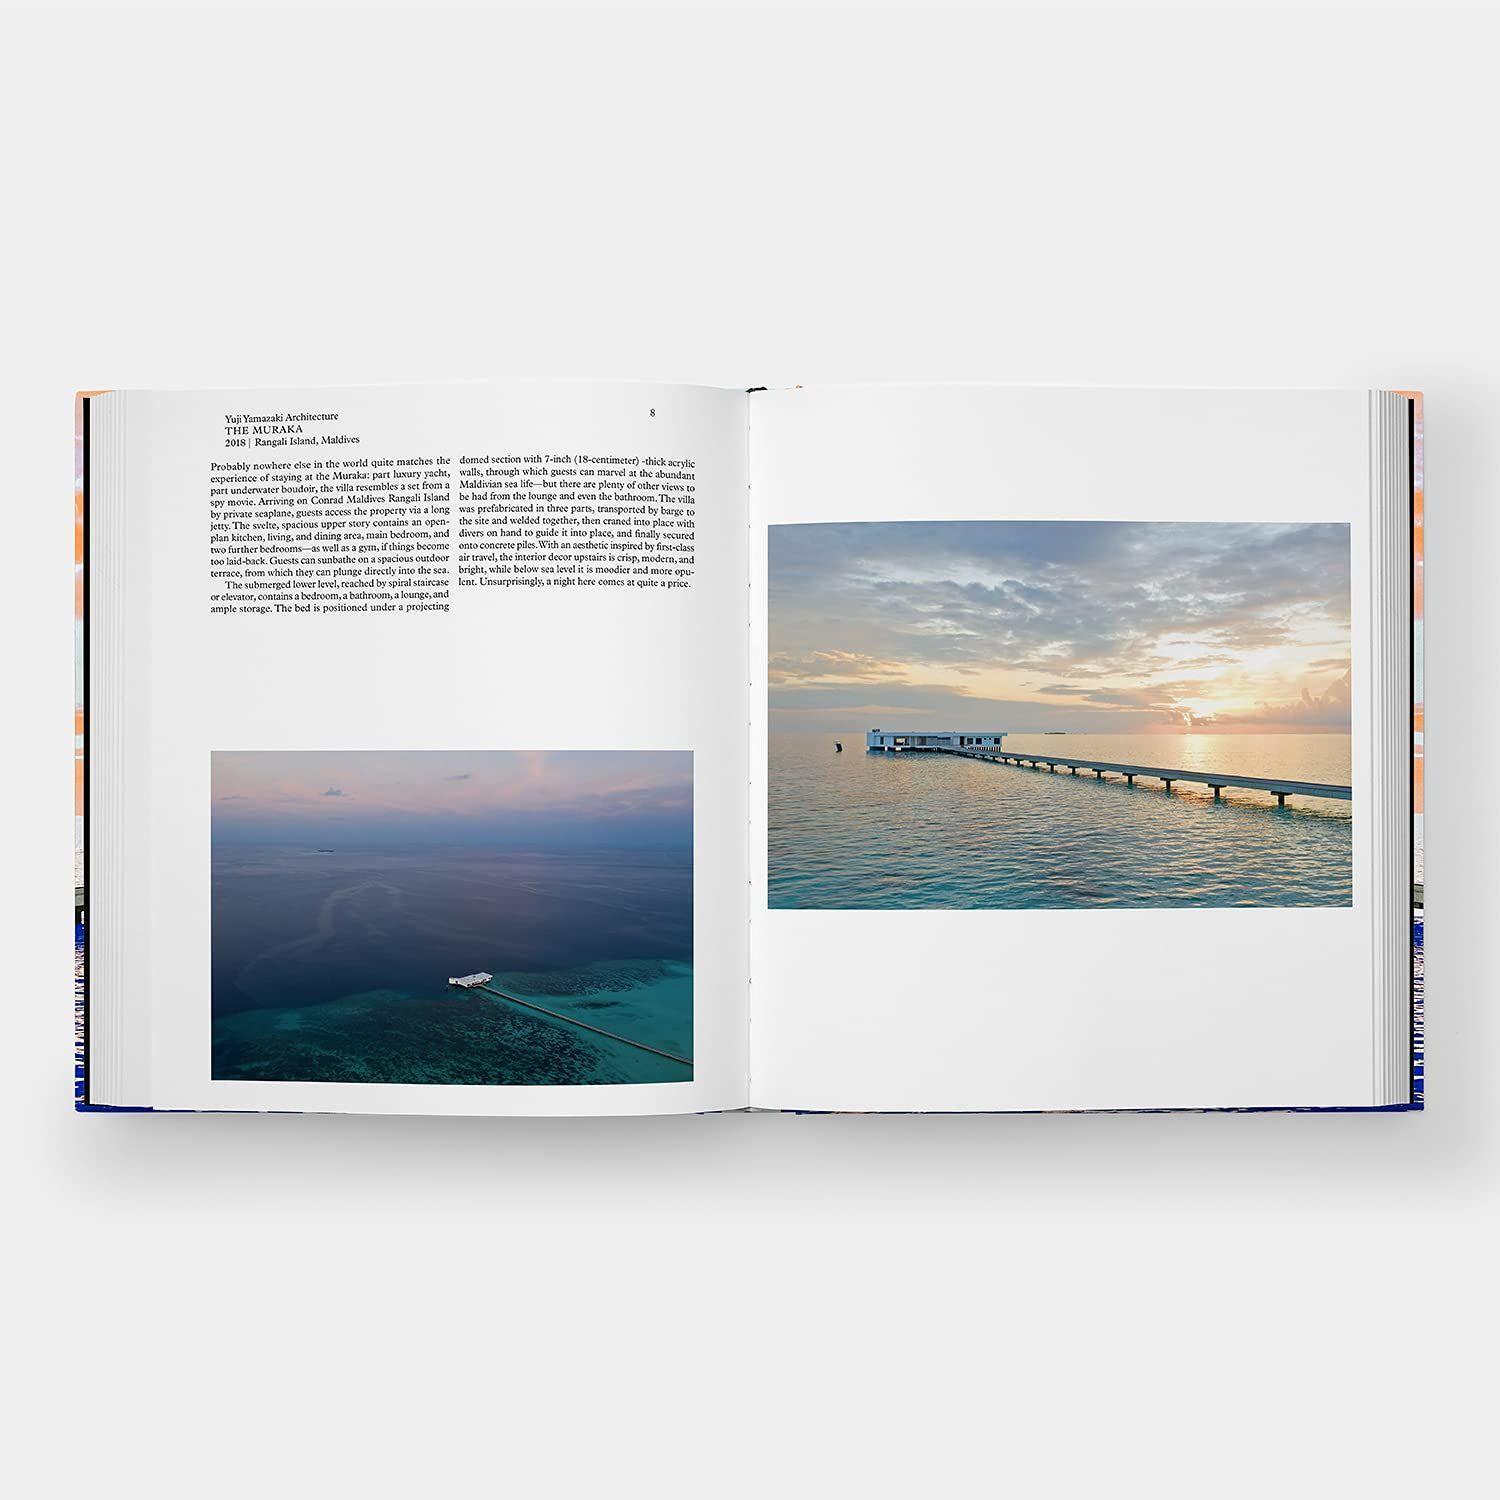 Bild: 9781838663278 | Living by the Ocean | Contemporary Houses by the Sea | Phaidon Editors